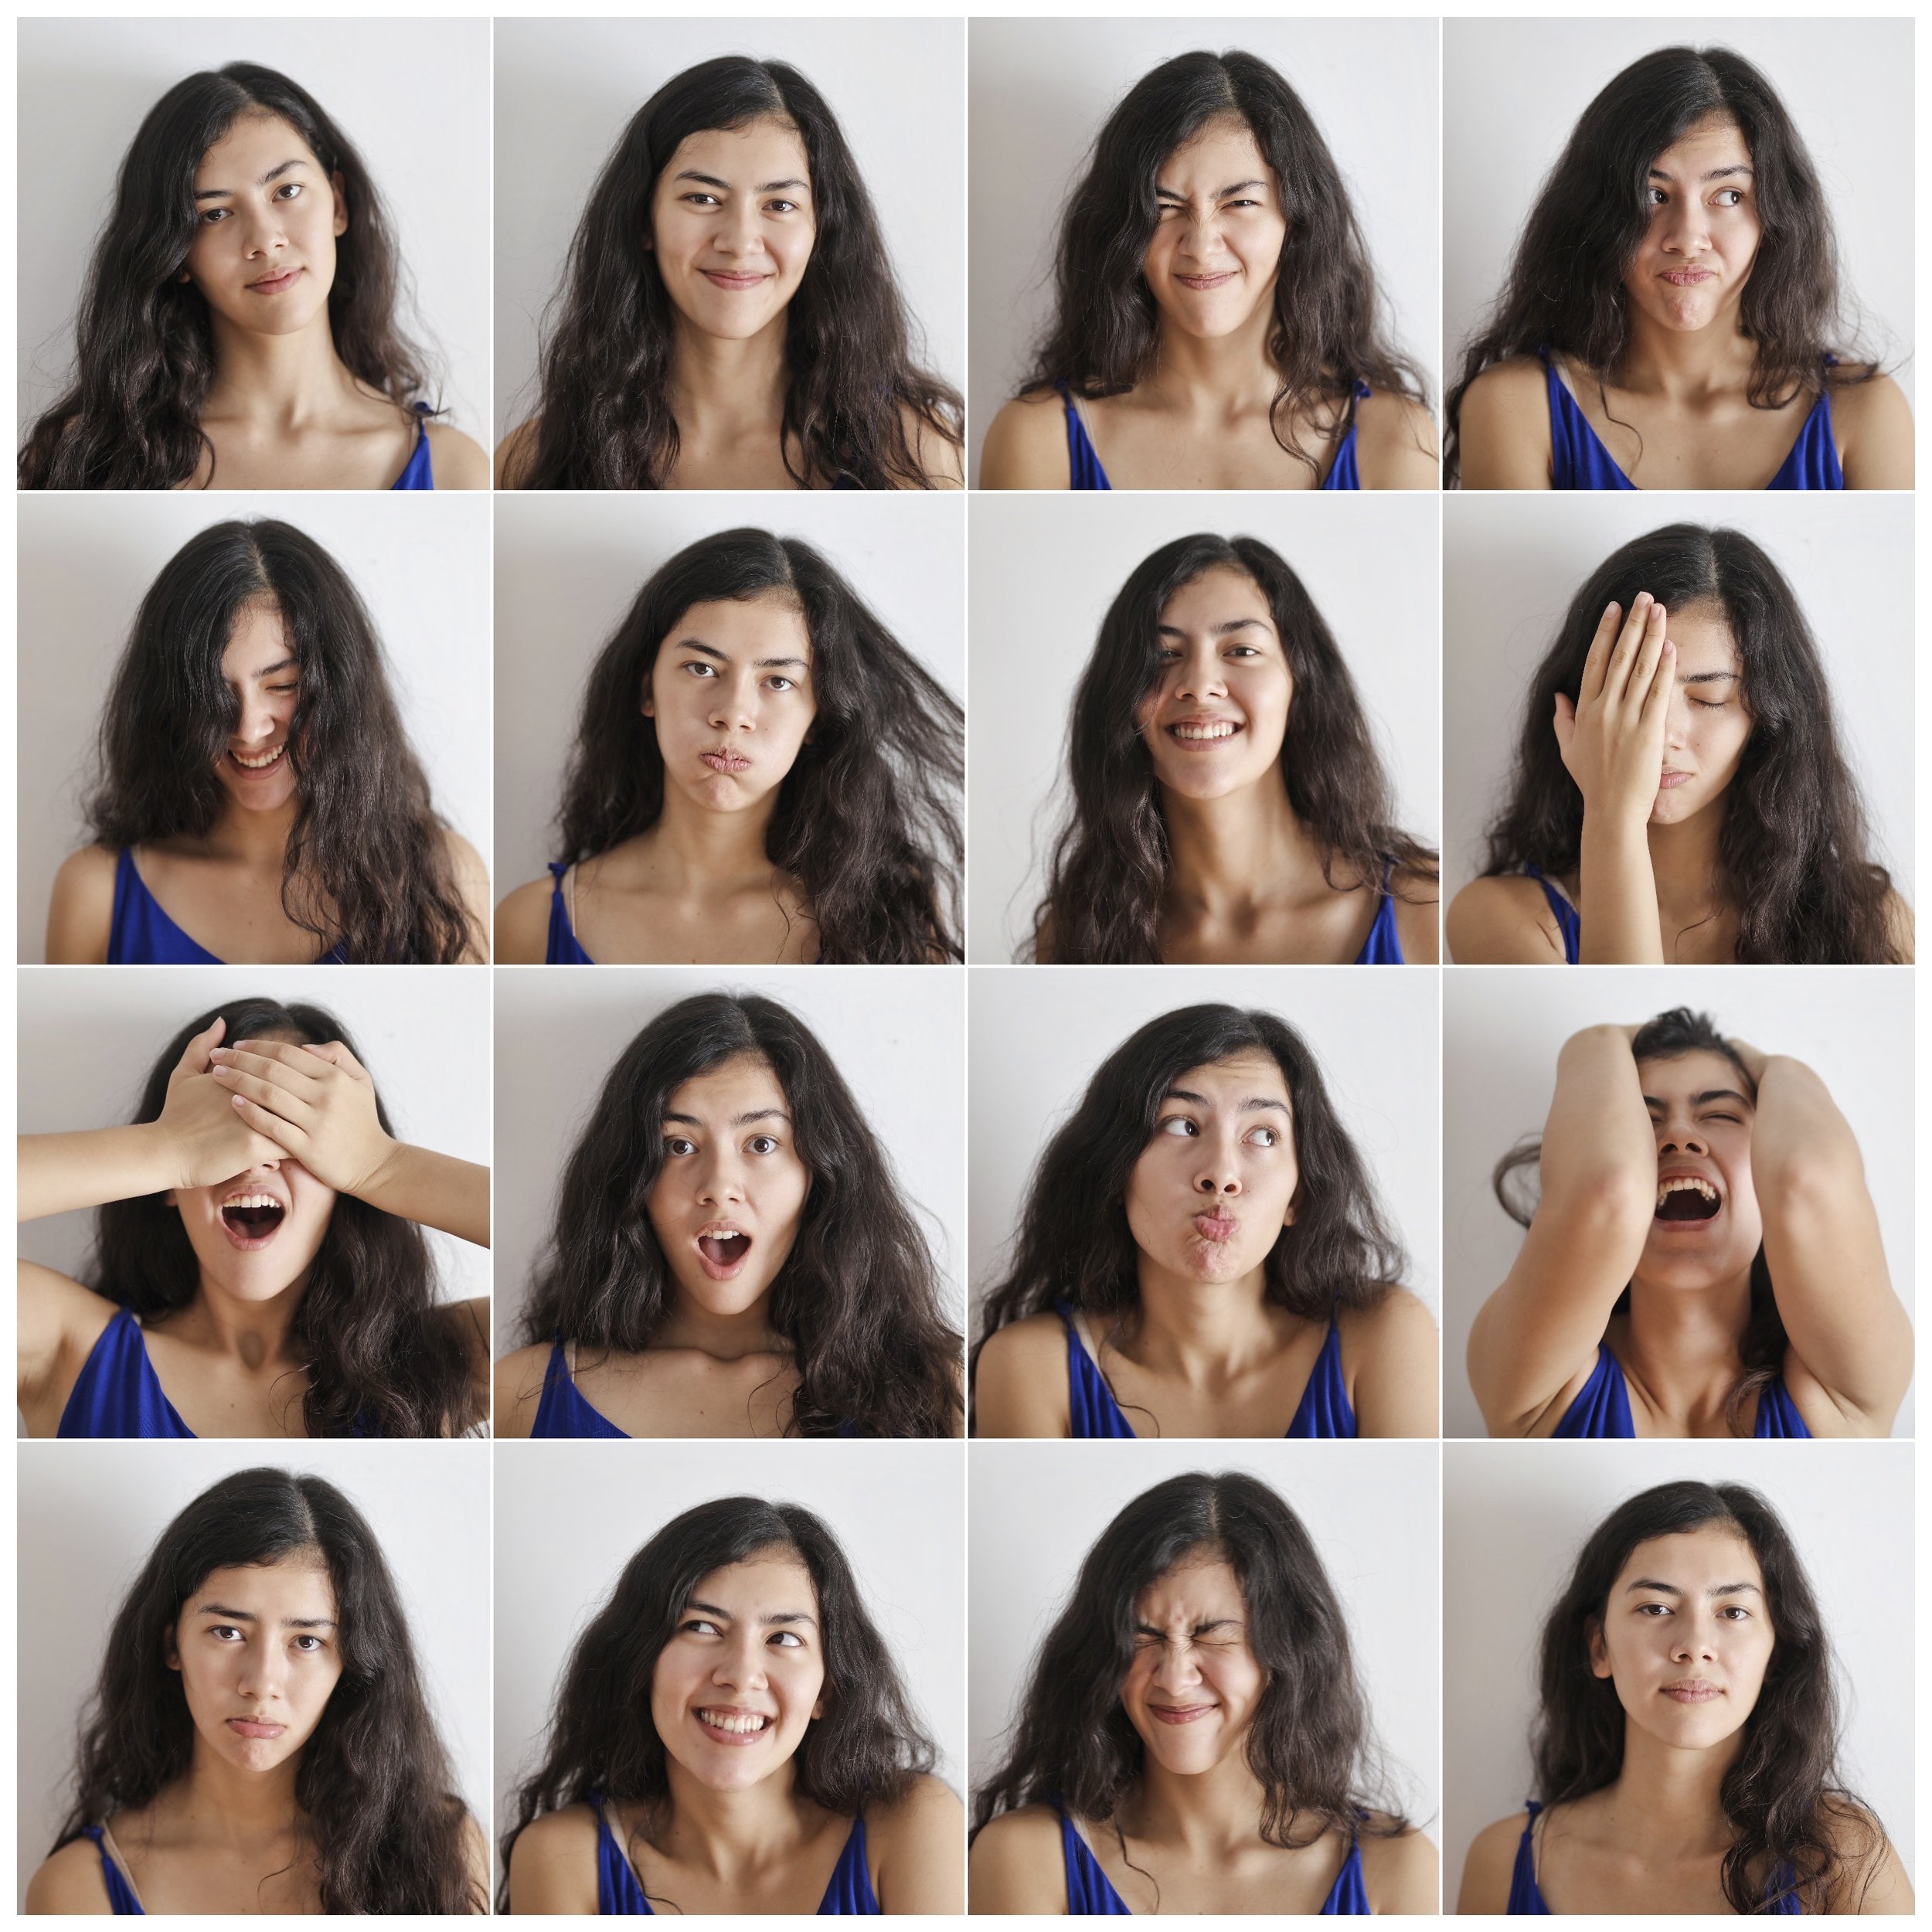 women displaying many different emotions